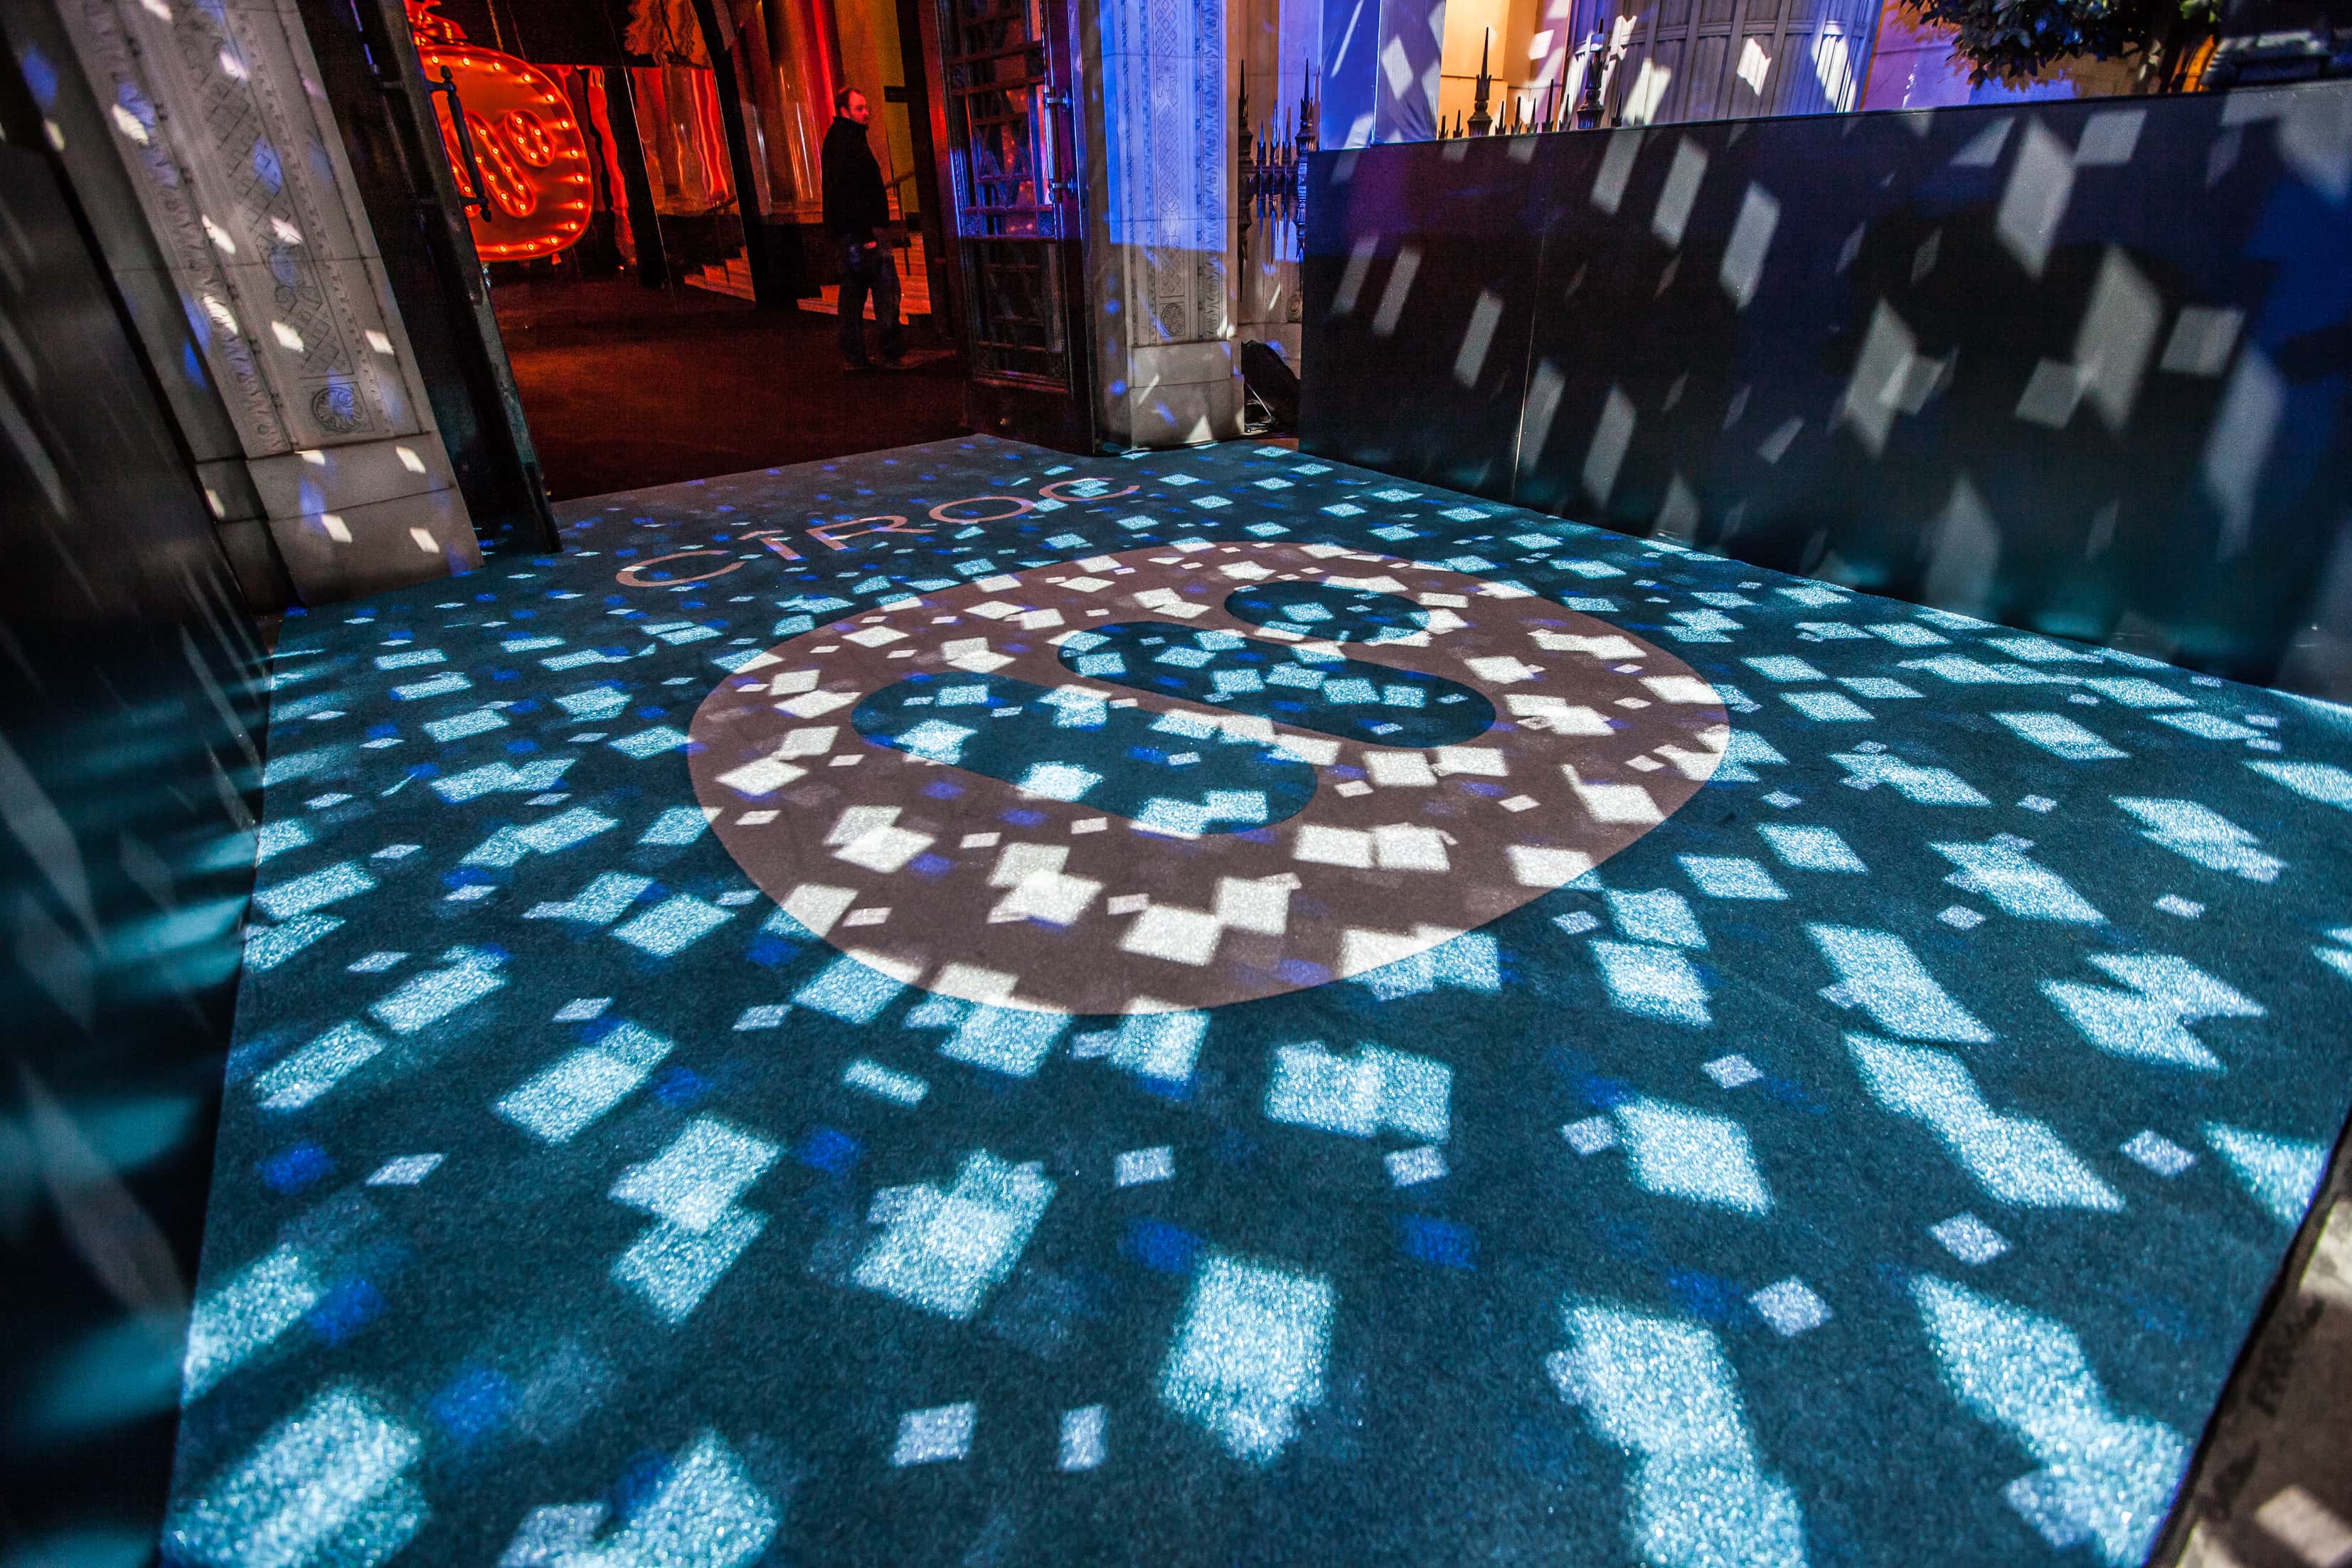 Image of Twister Reflex Carpet at the 2016 Brit Awards